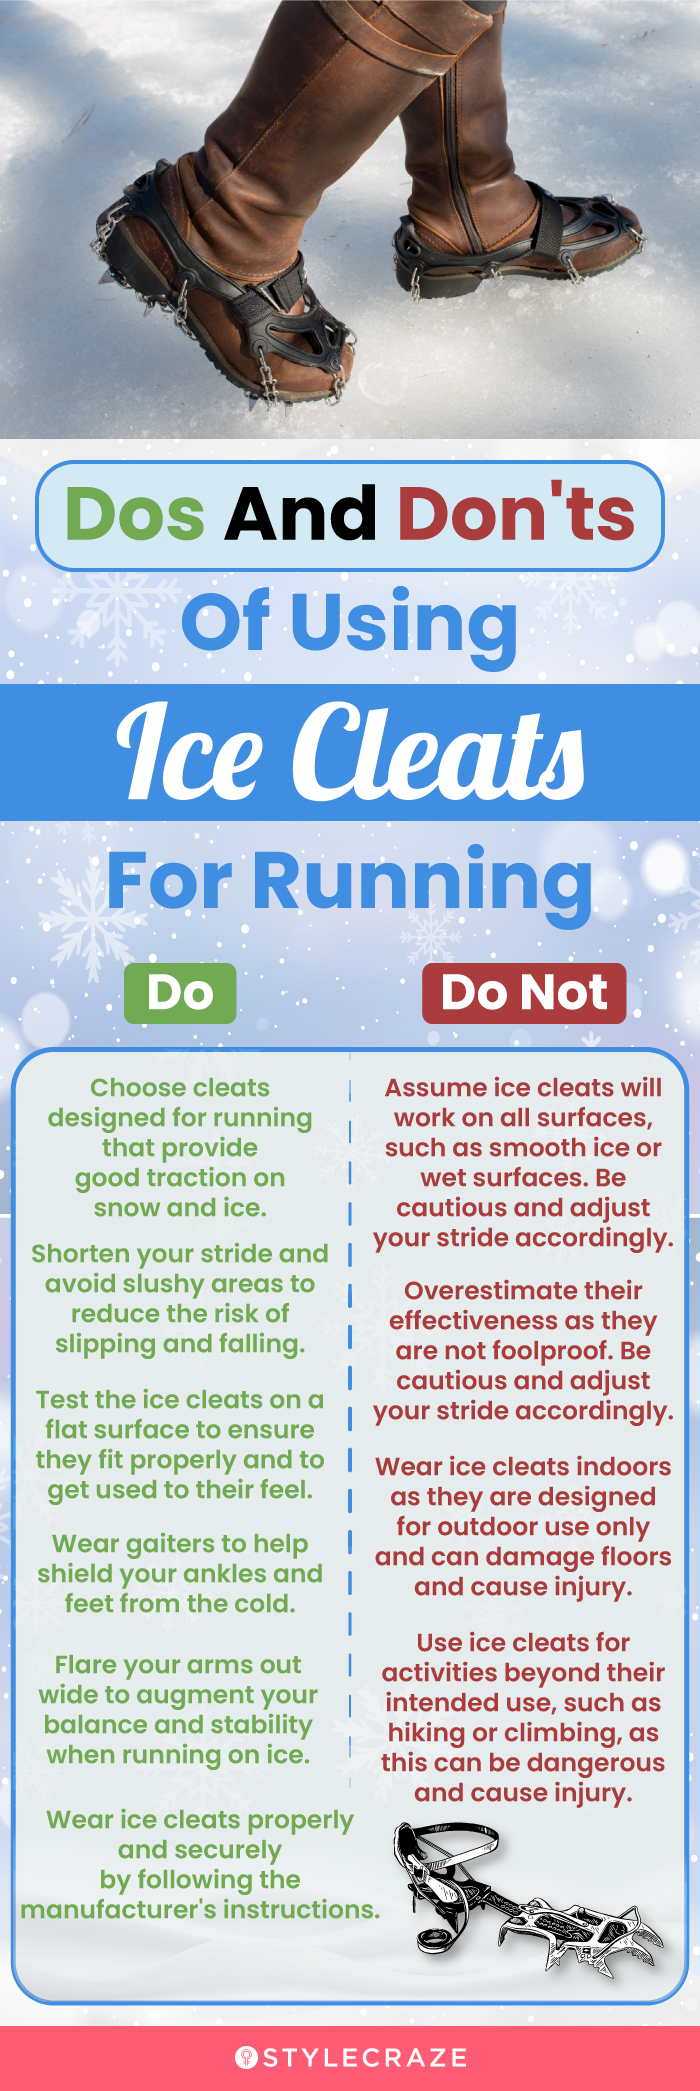 Do's And Don'ts Of Using Ice Cleats For Running (infographic)